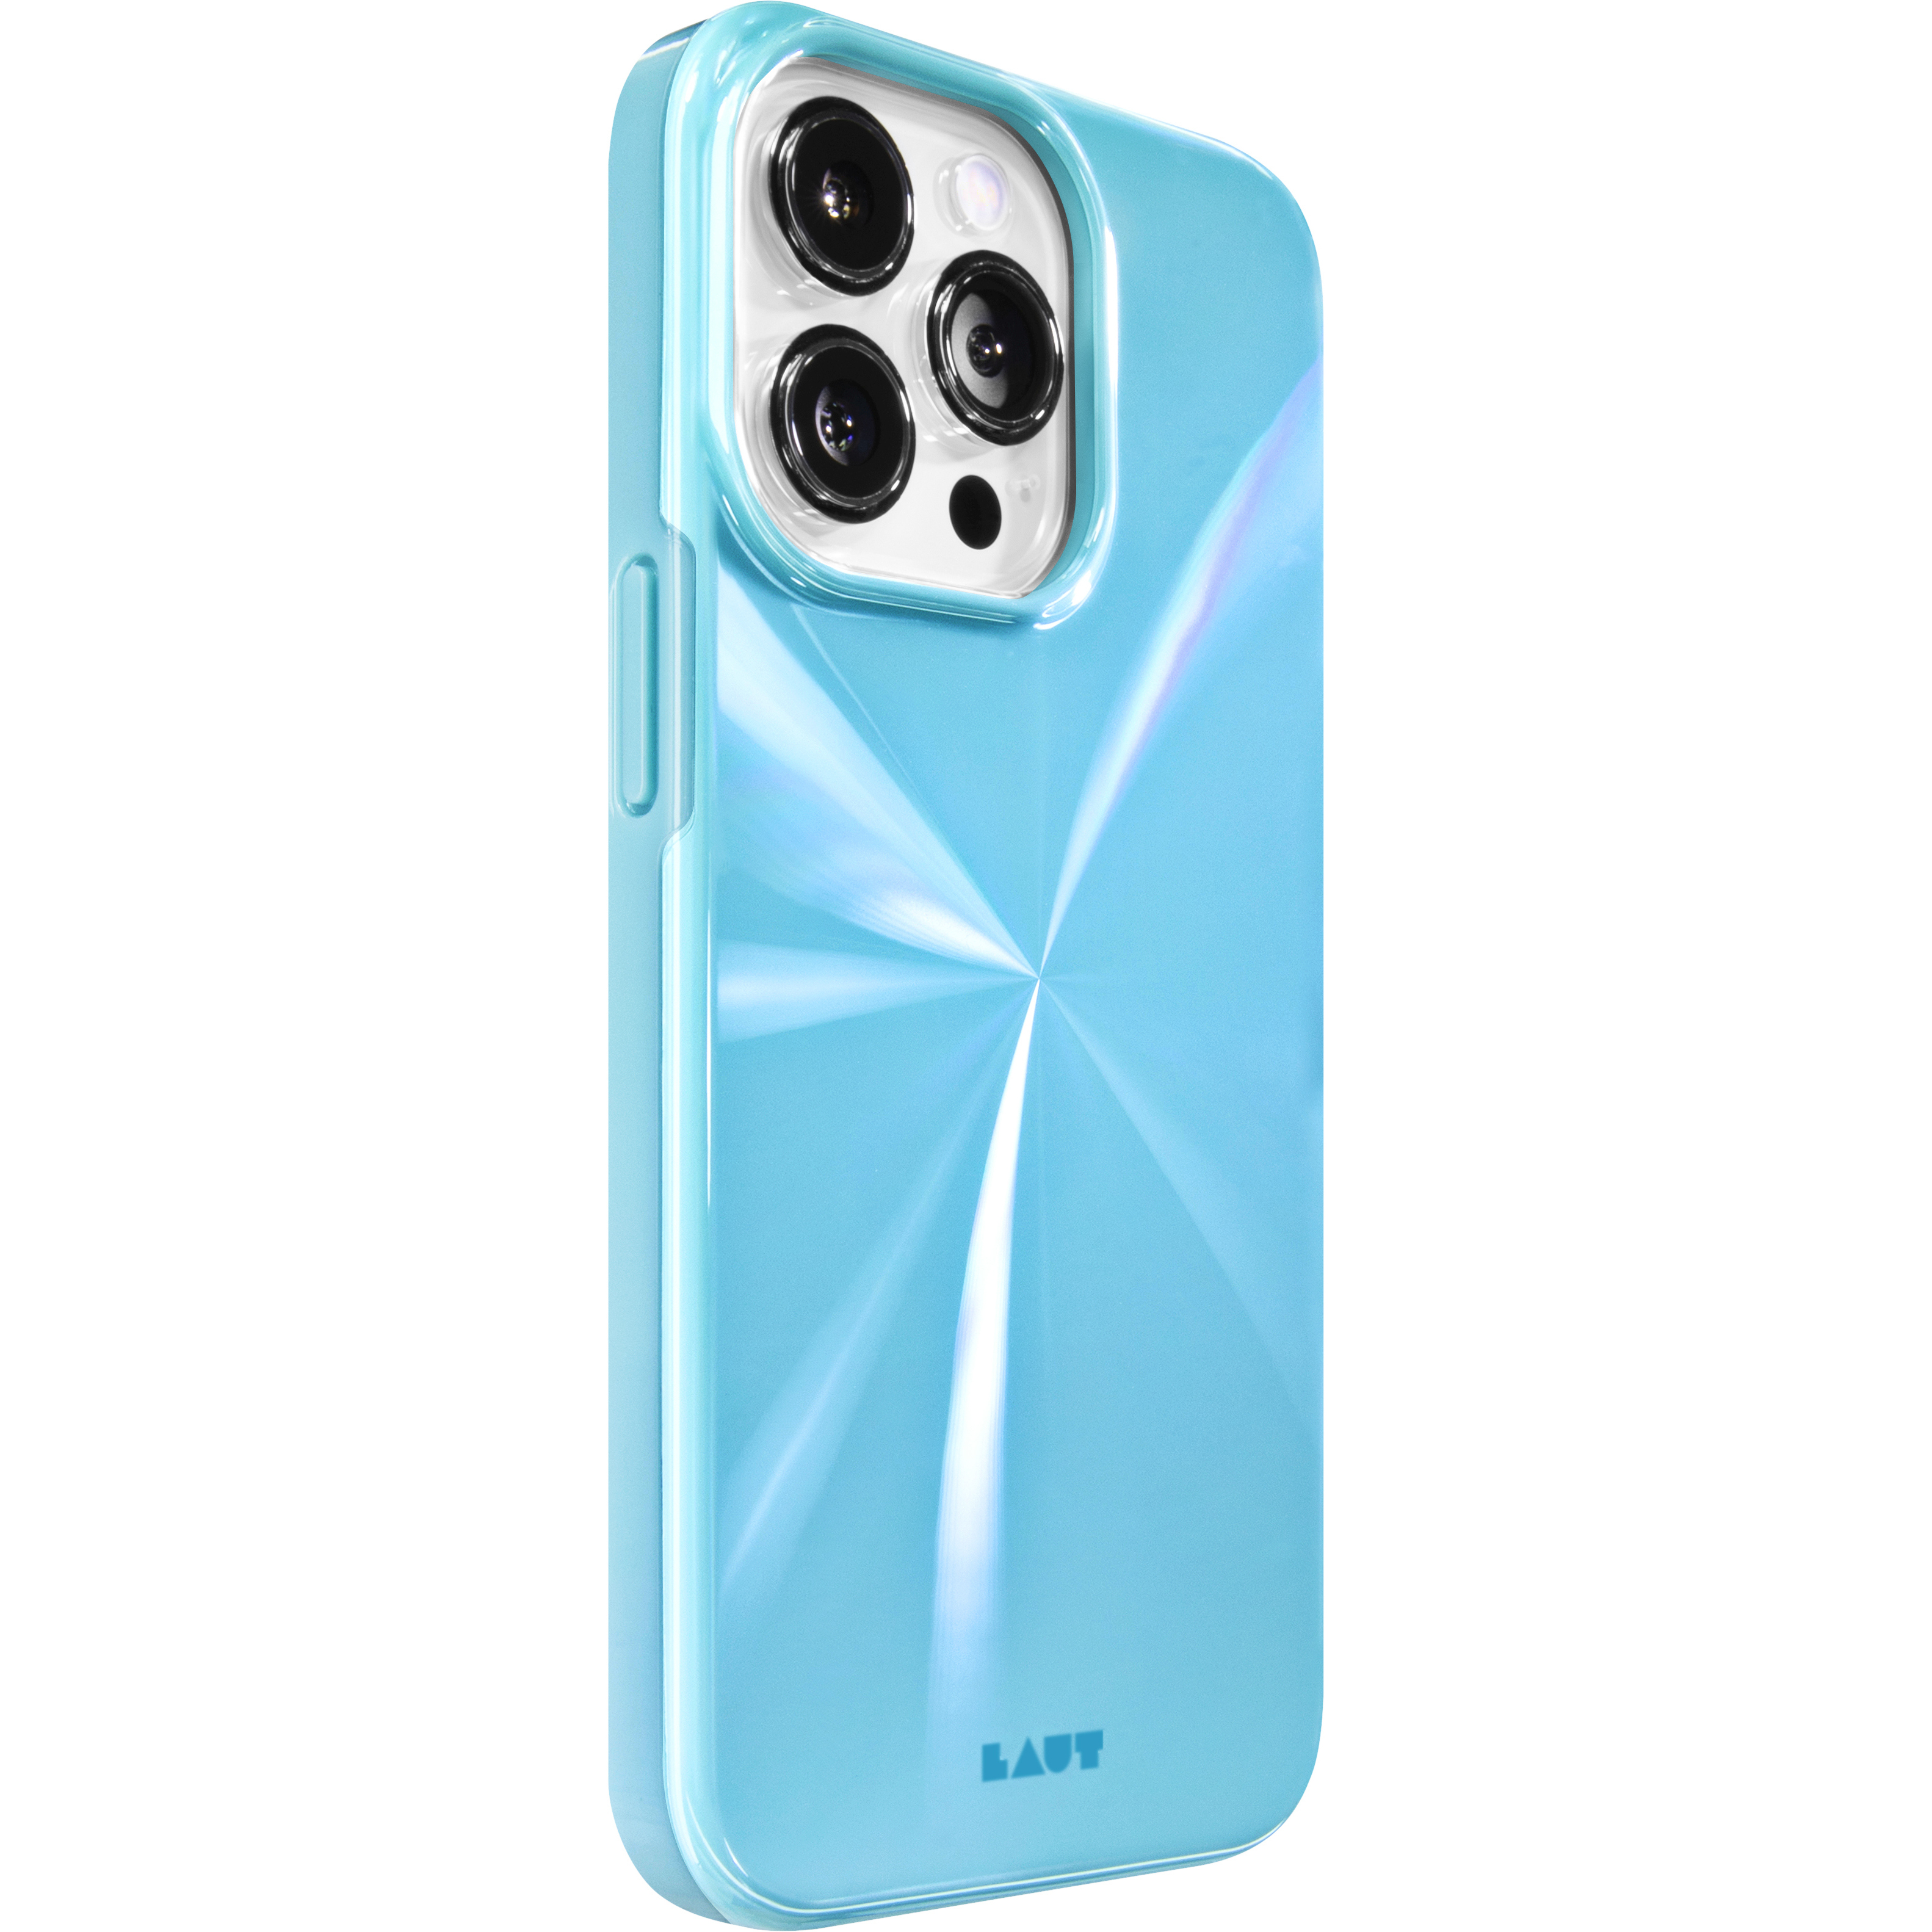 14 LAUT BLUE Huex IPHONE APPLE, MAX, Reflect, PRO Backcover,